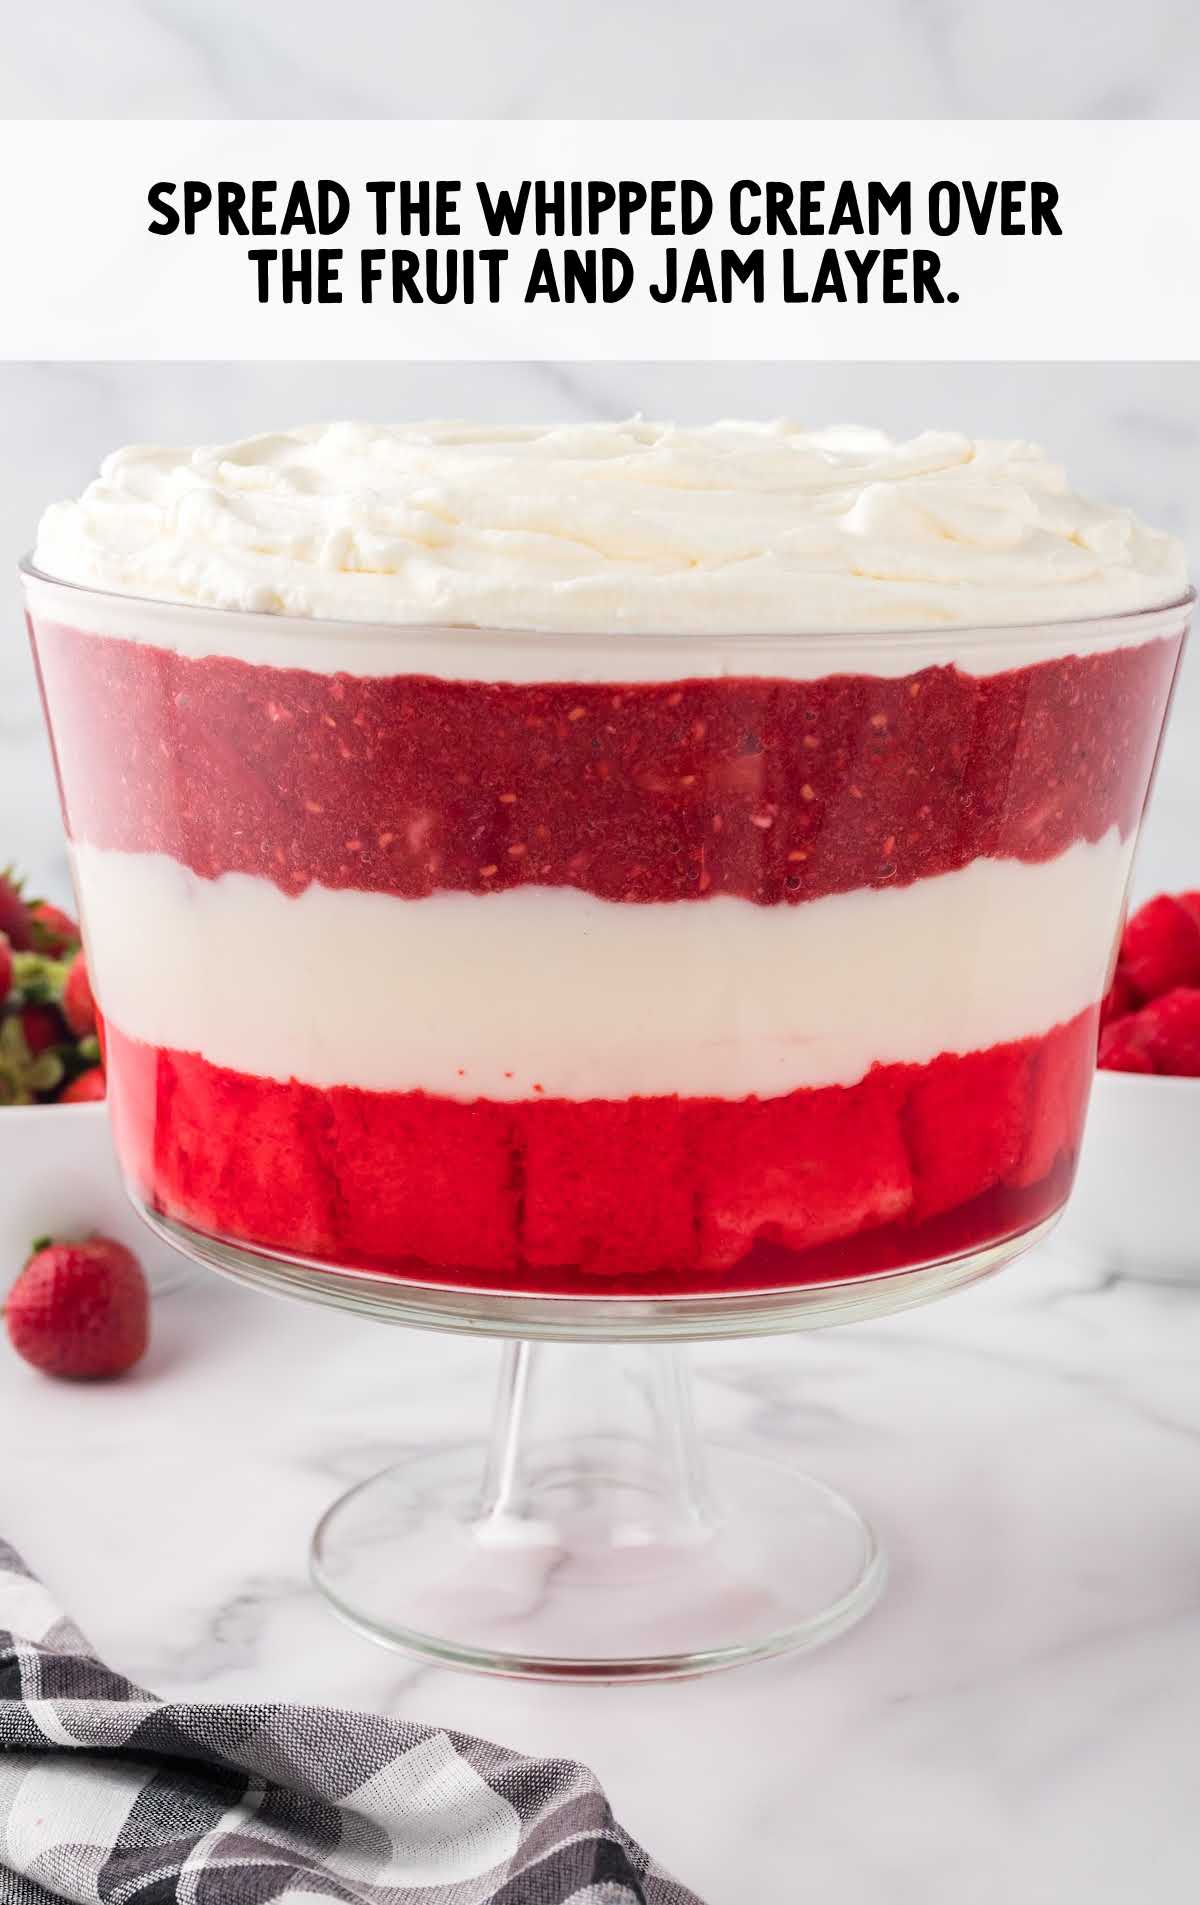 whipped cream spread over the fruit and jam layer